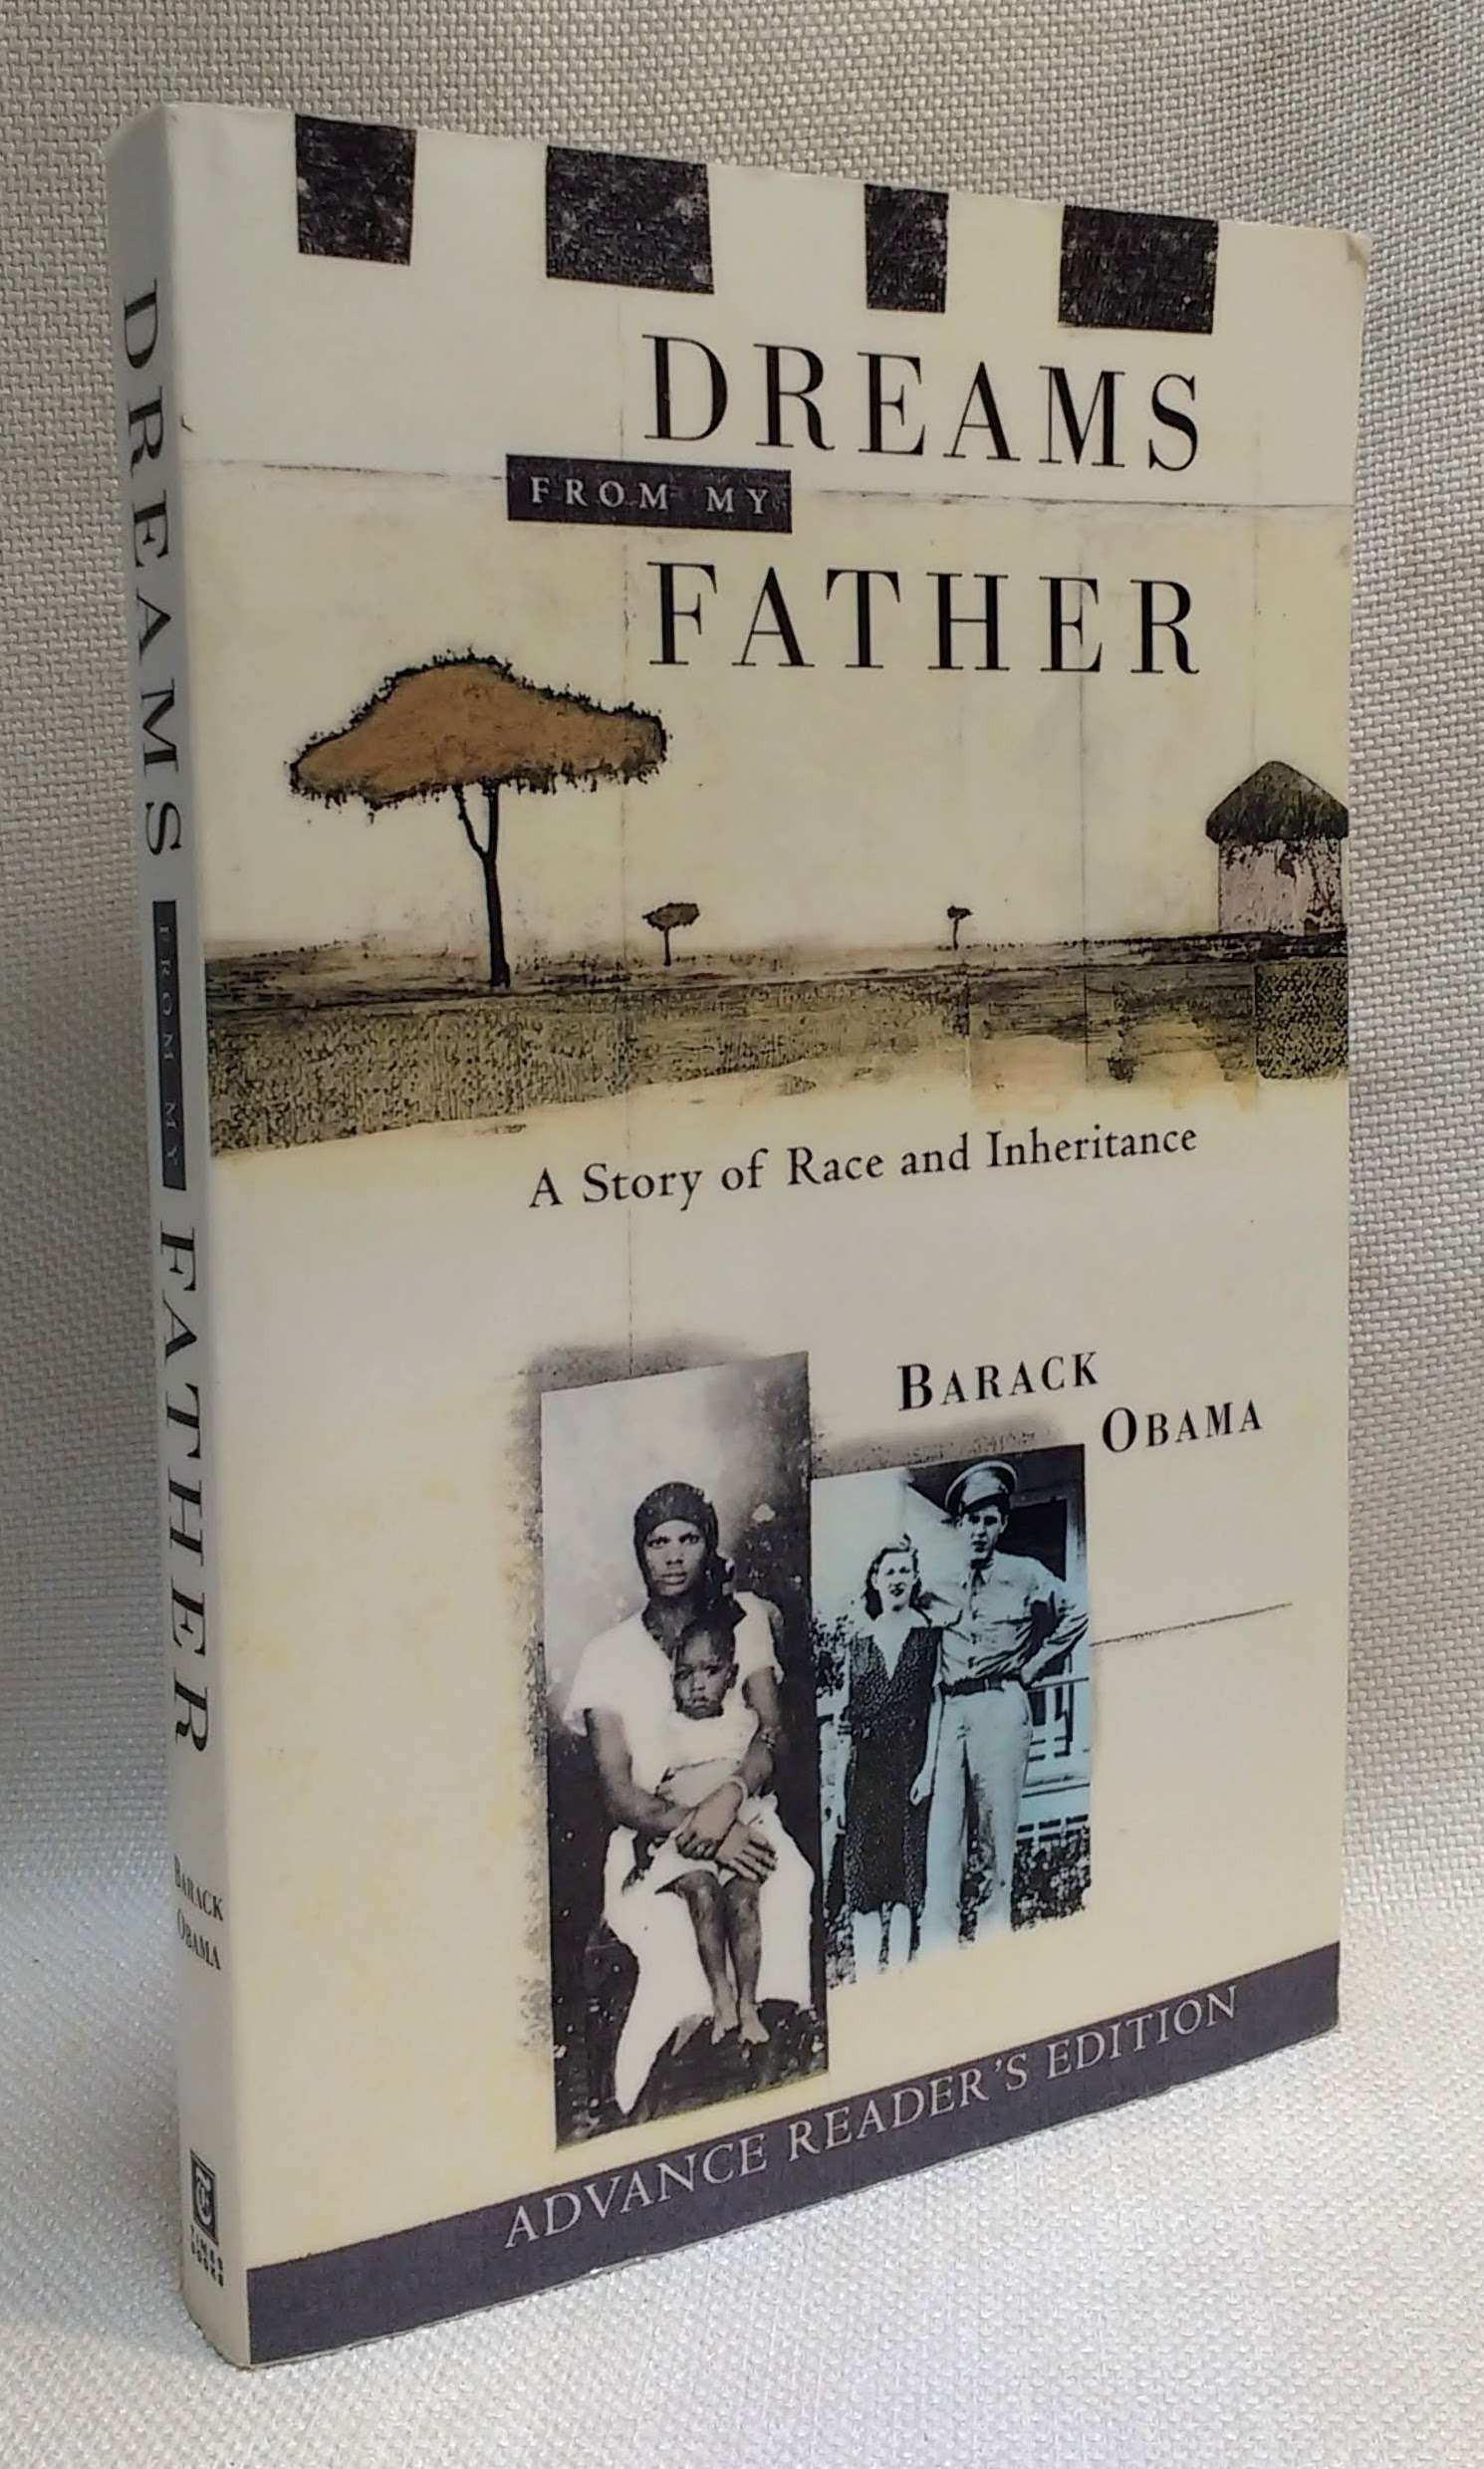 and　Reader's　Race　of　A　[Advance　Story　Inheritance　from　Father:　My　Dreams　Edition]